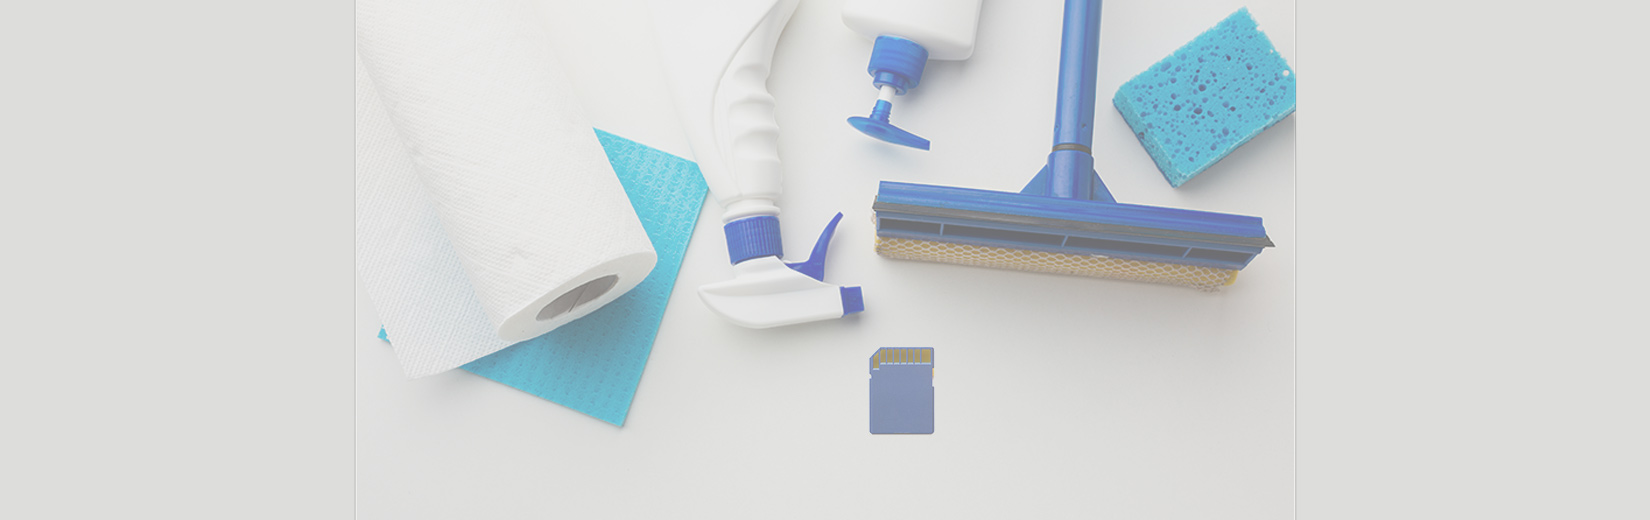 SD Card and cleaning products